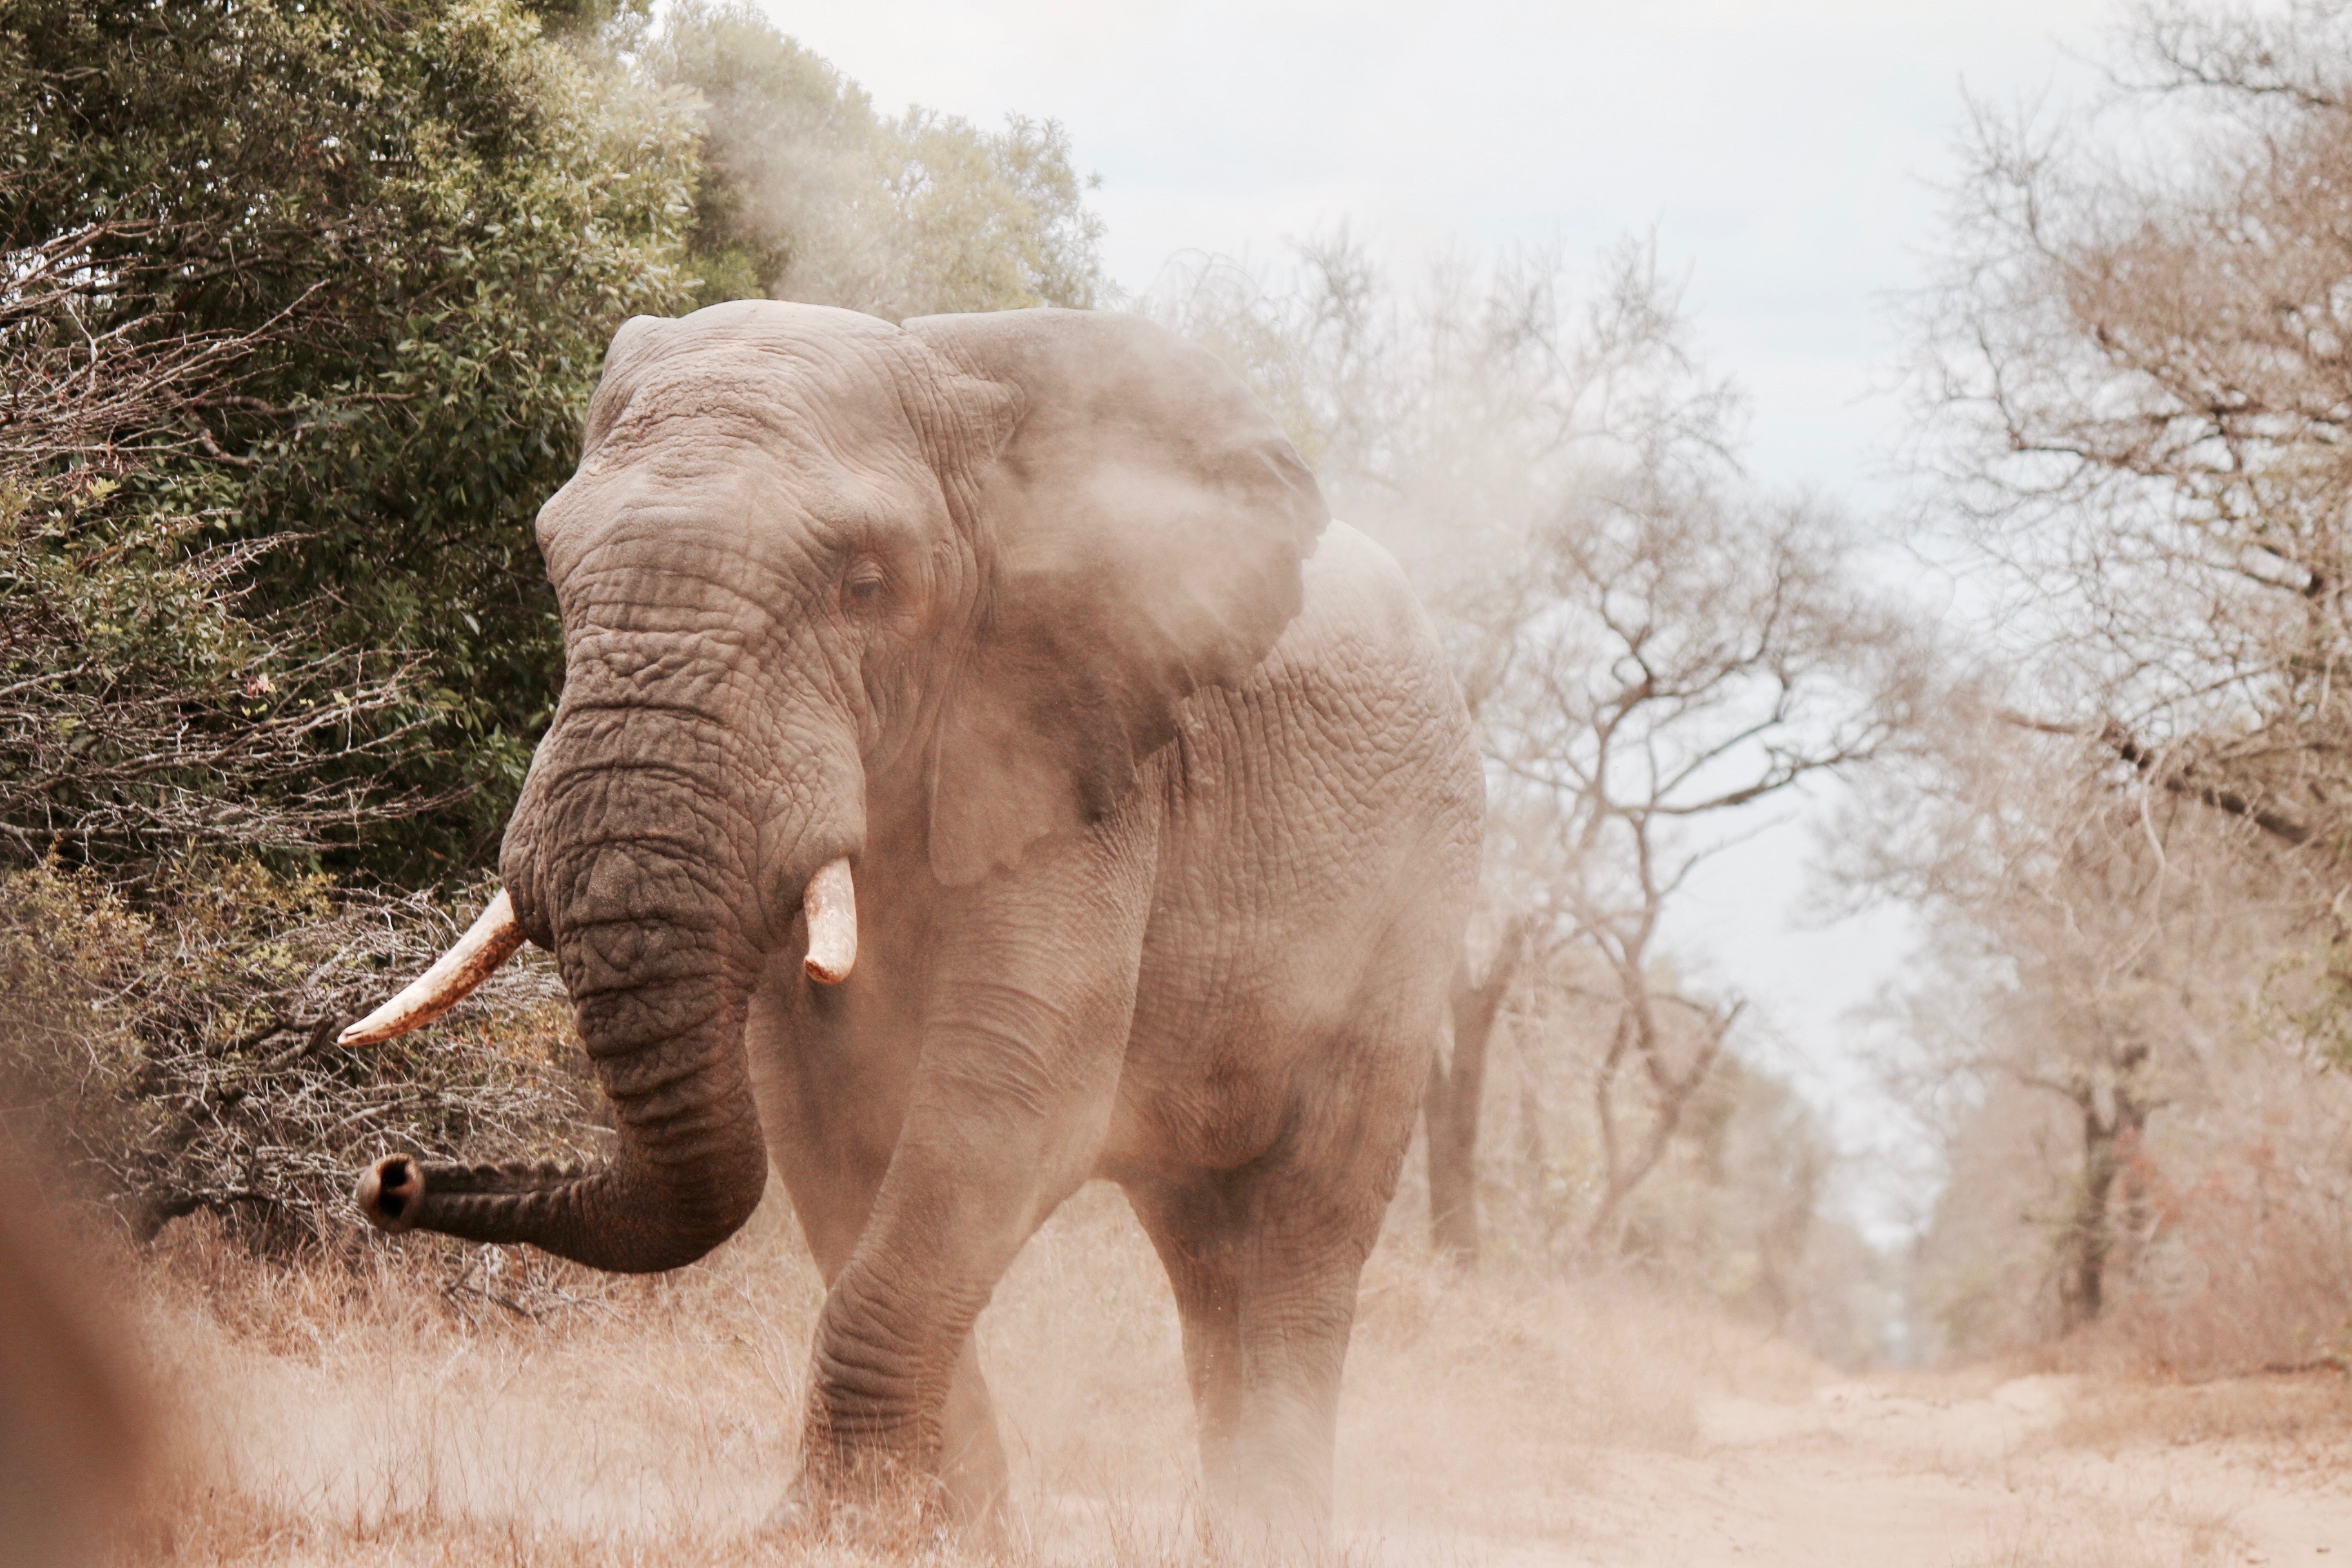 A relatively close-up photo of an elephant in the middle of a dusty road. It's legs look like the elephant is stomping toward the camera as dust swirls around the animal.